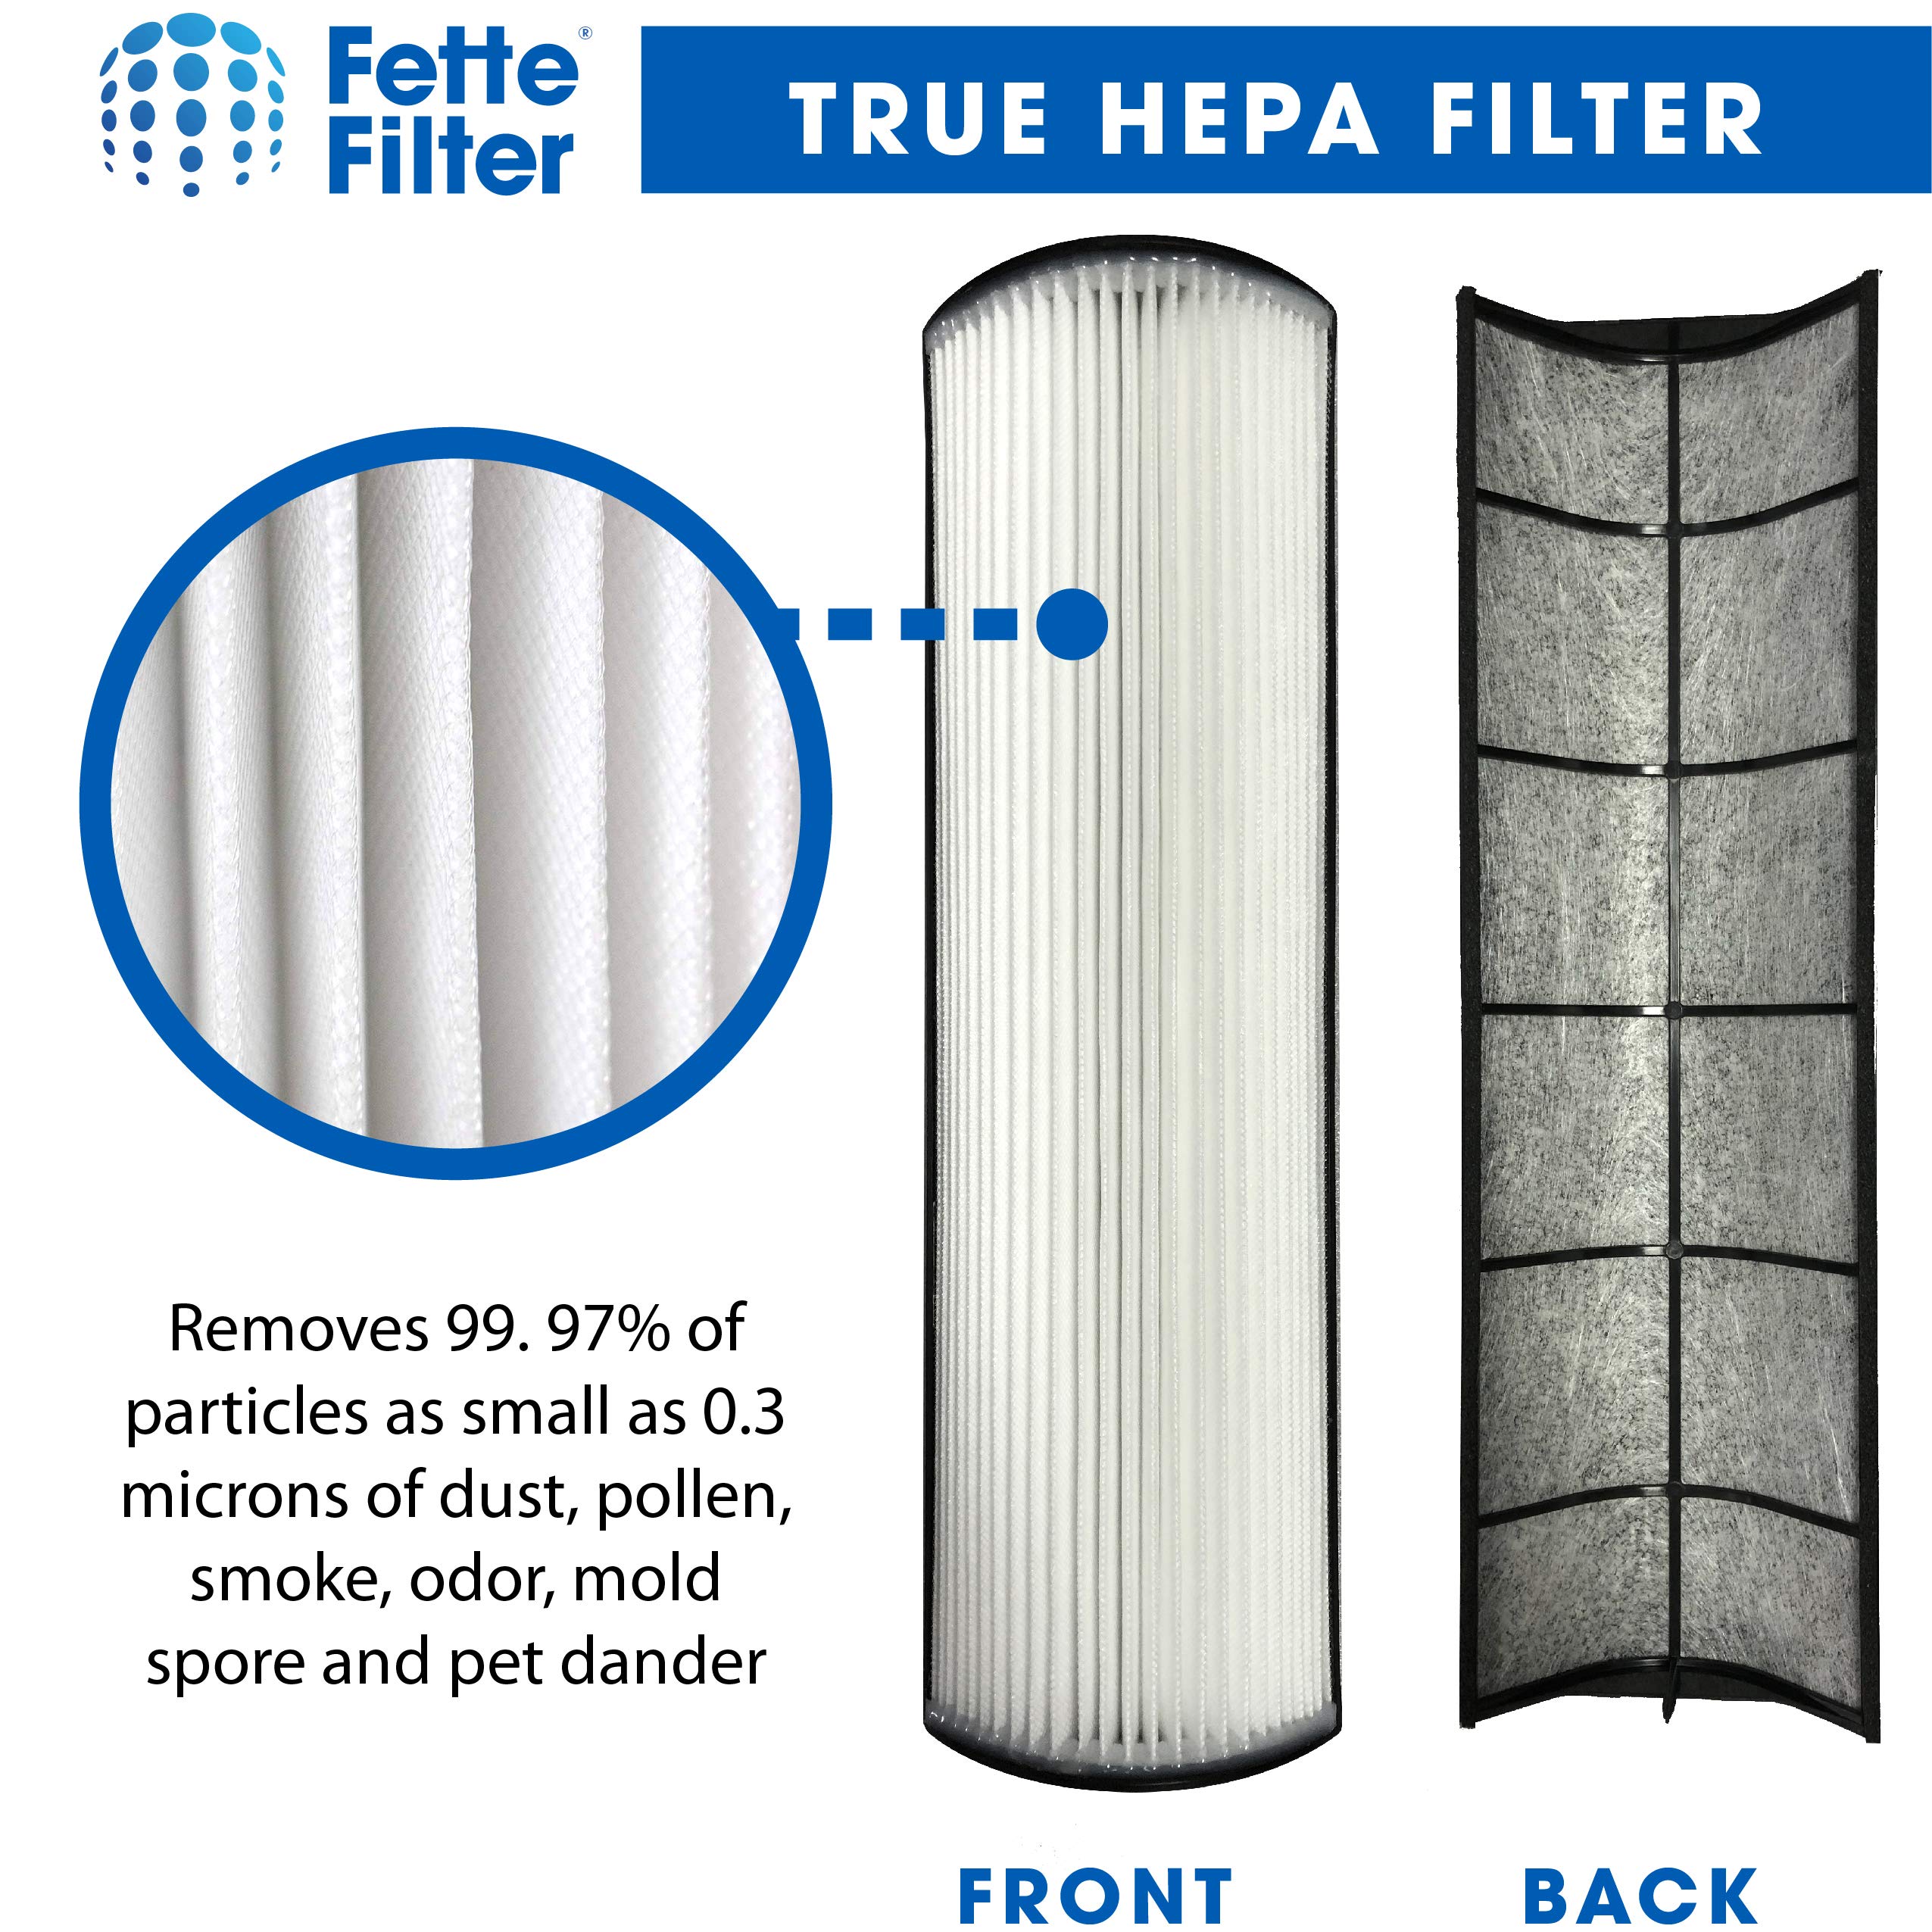 Fette Filter - TPP440F True HEPA H13 Replacement Filter Compatible with Therapure Envion Air Purifier Models TPP440 TPP540 TPP640 TPP640S - Package Contains 2 Replacement Filters.